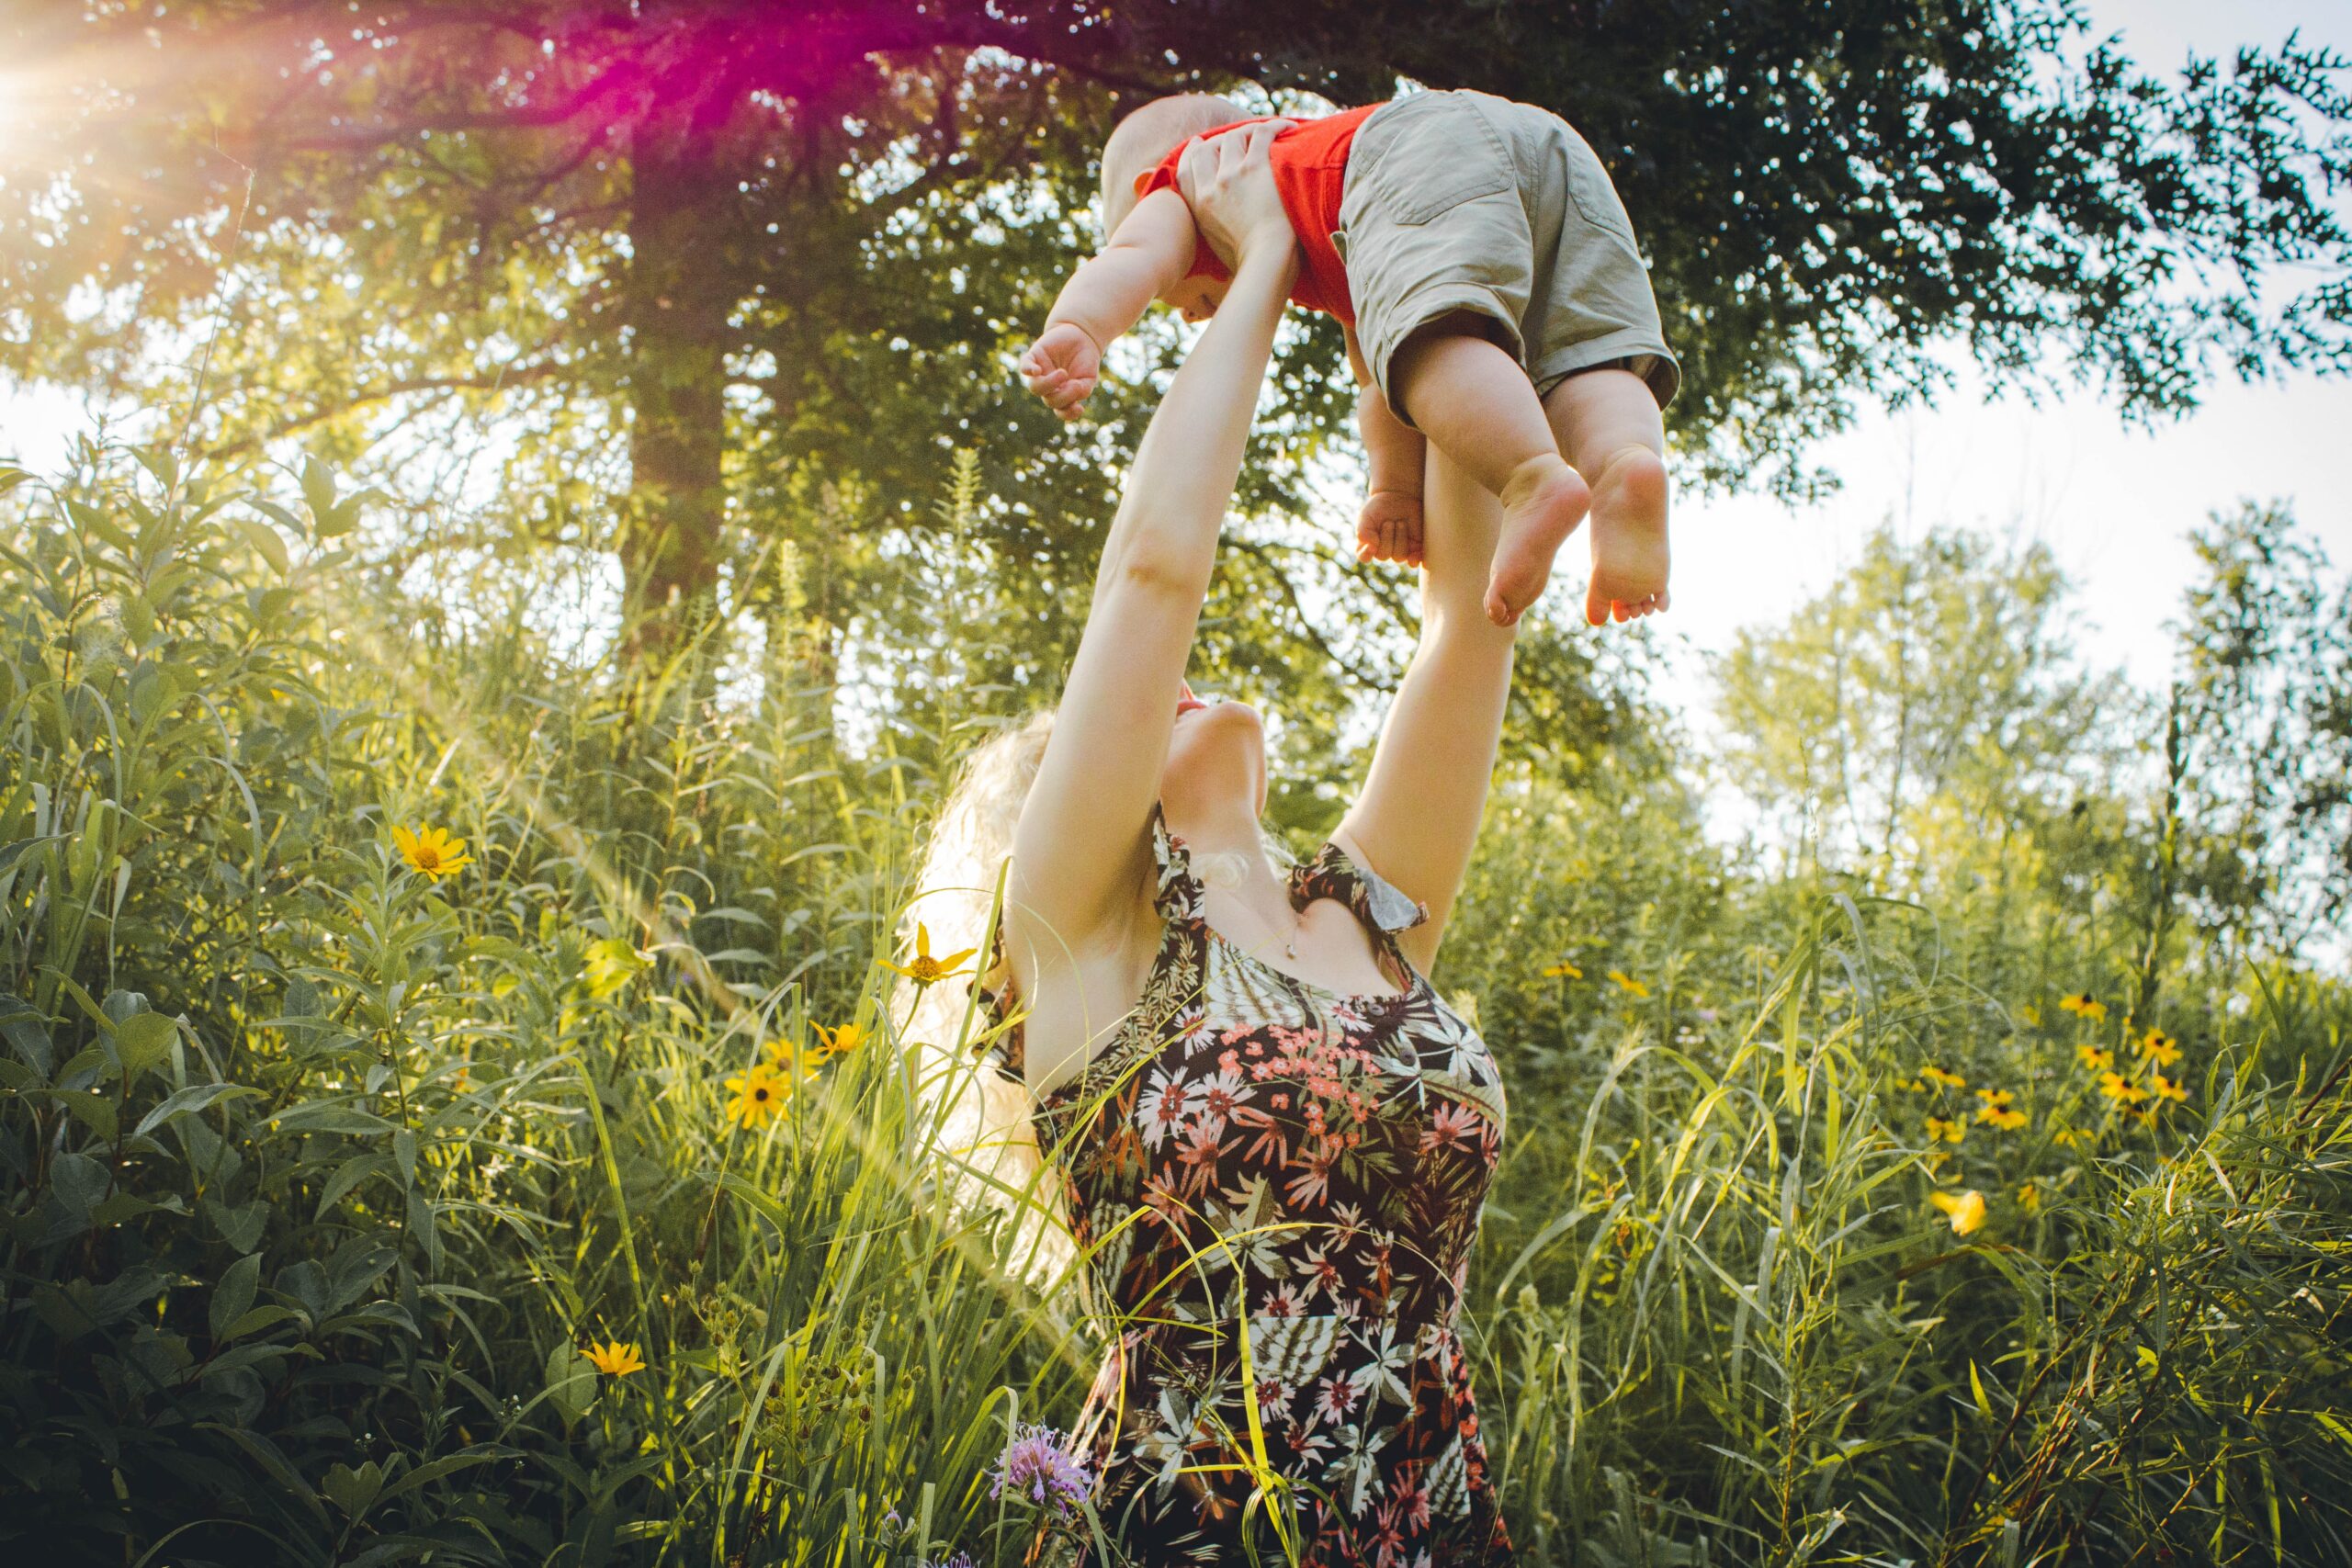 mother tossing child into the air in a field